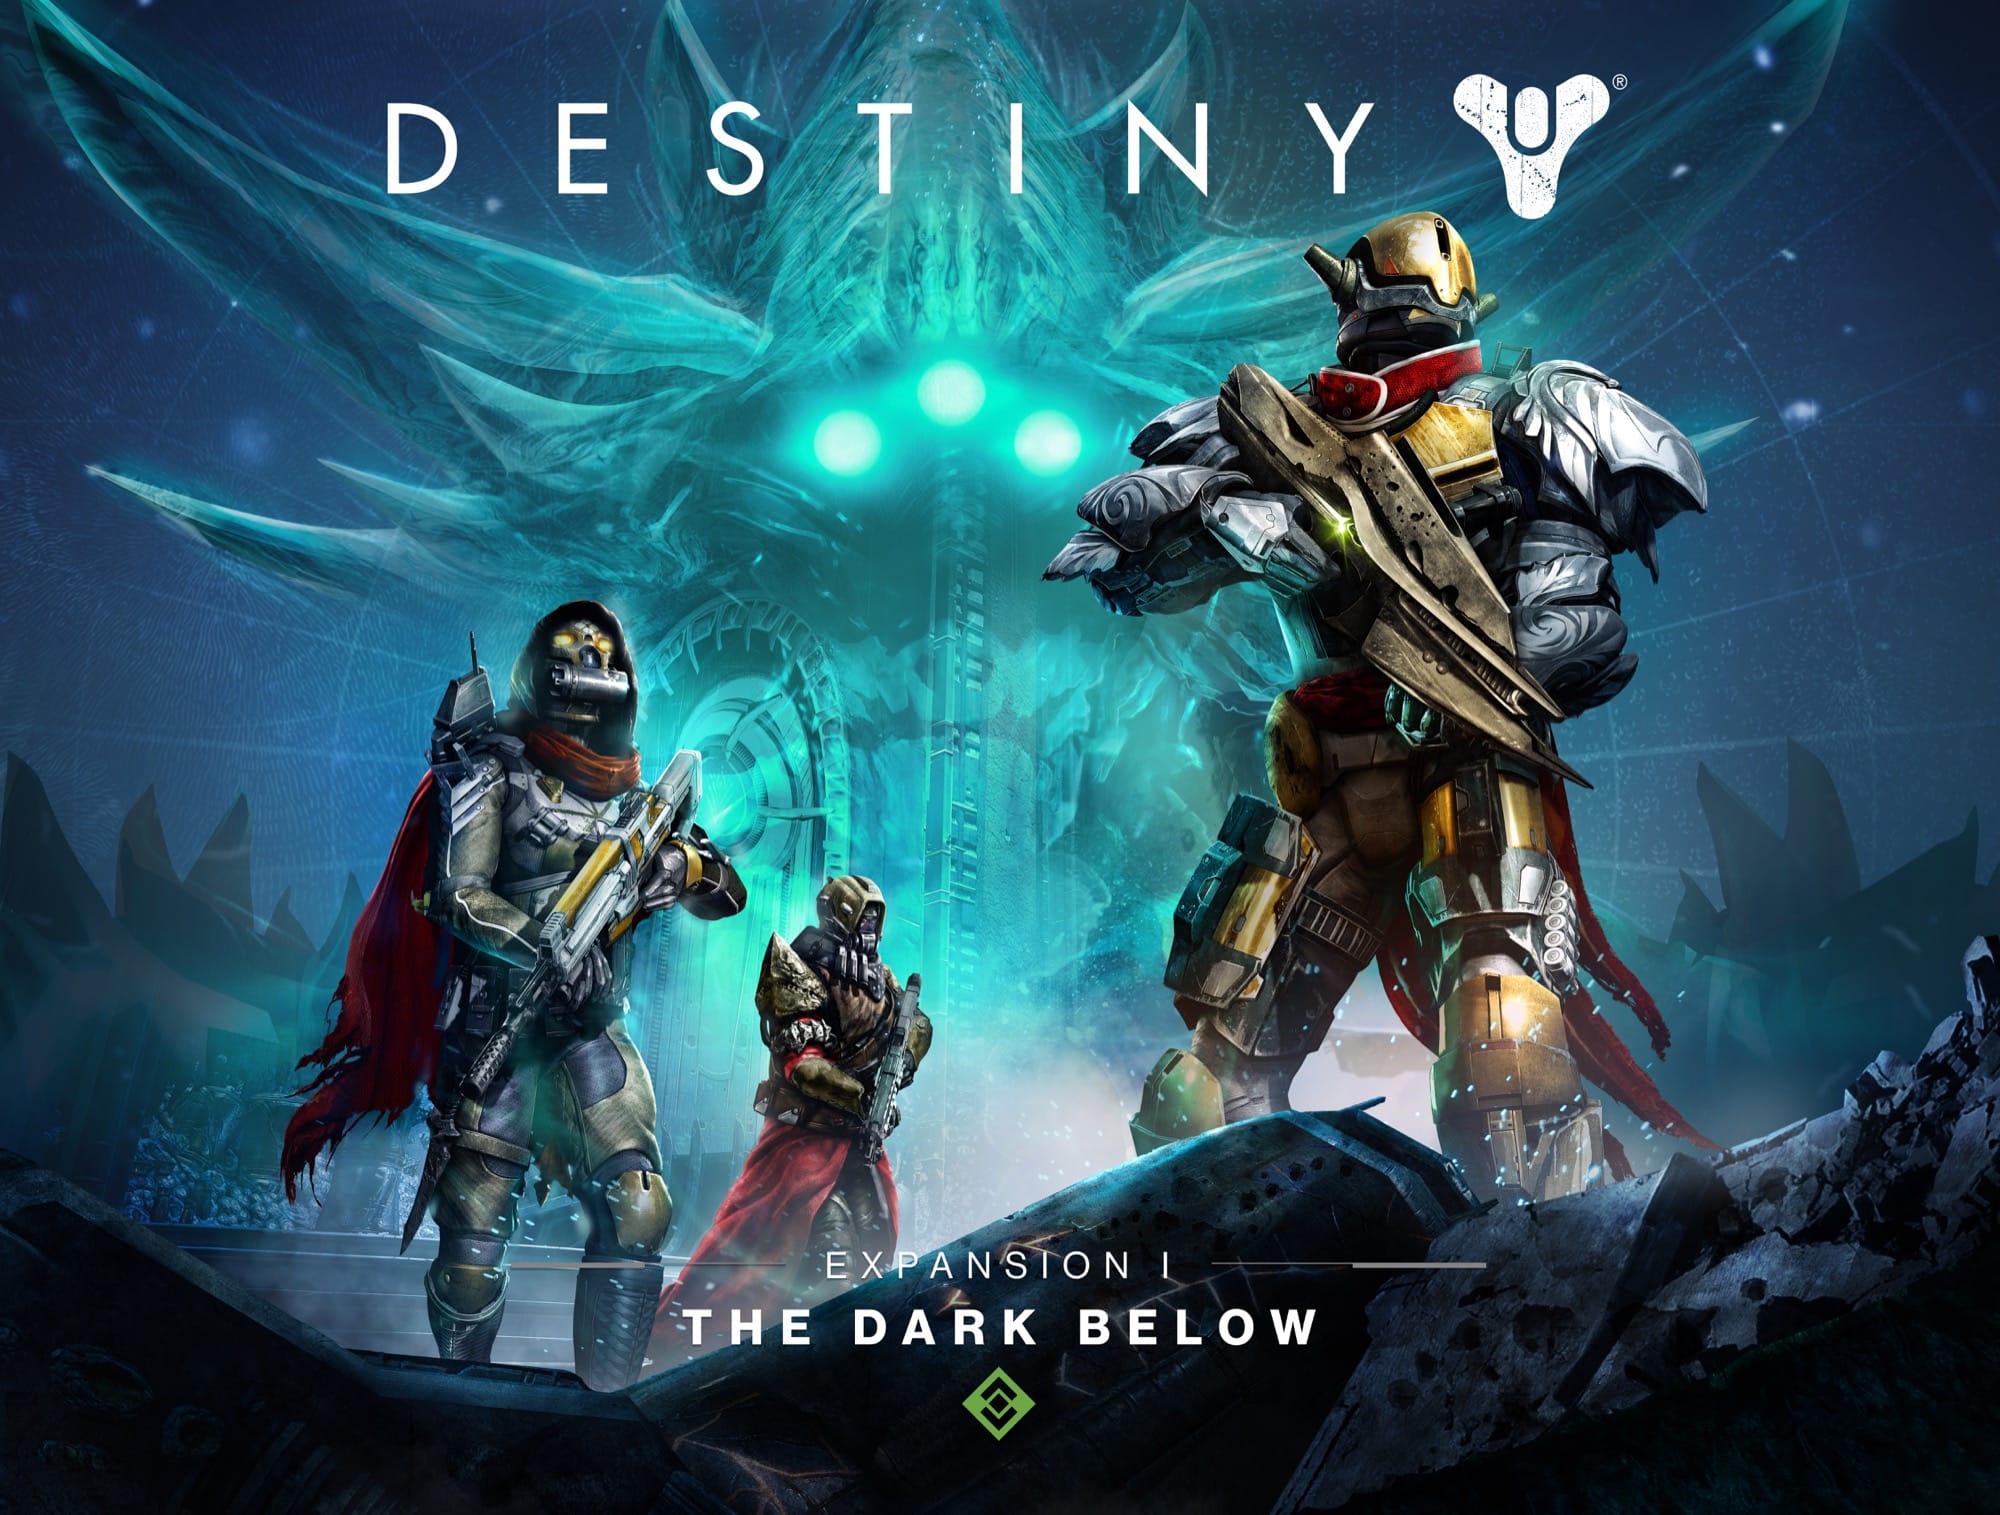 Destiny Poster CHOOSE YOUR SIZE The Dark Below New Xbox PS4 Hit Game  FREE P+P